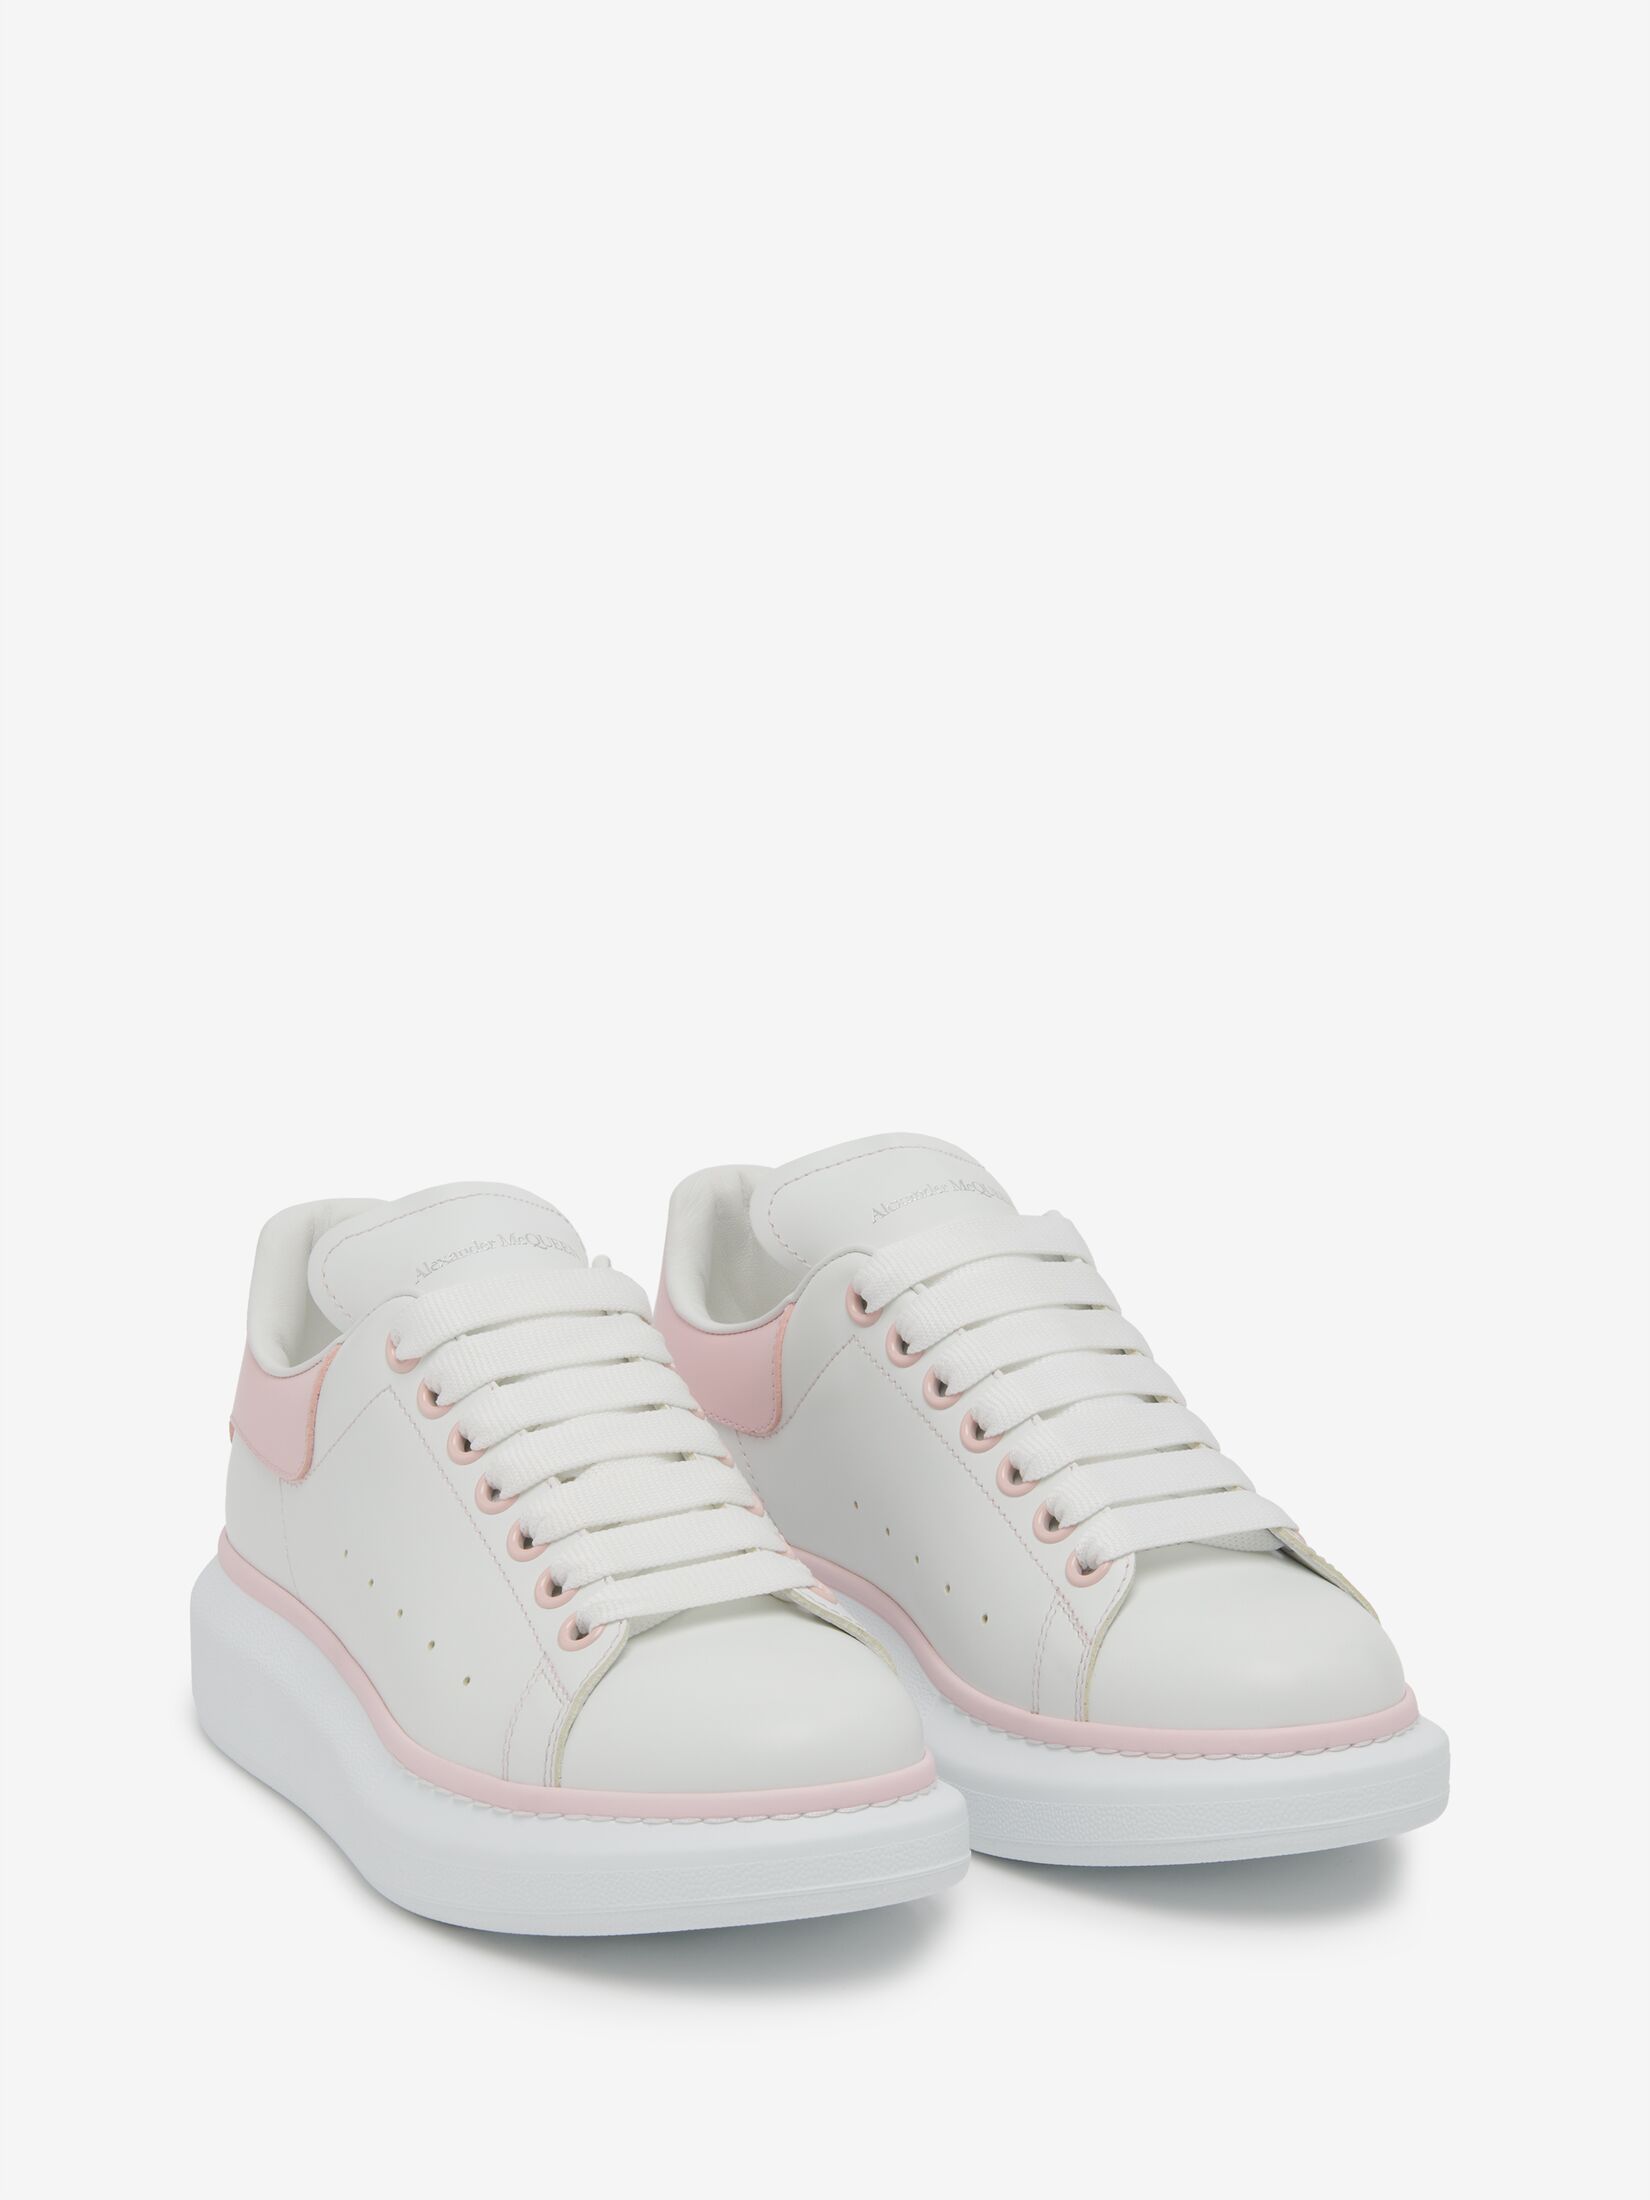 Alexander McQueen Sneakers & Casual shoes for Kids sale - discounted price  | FASHIOLA INDIA